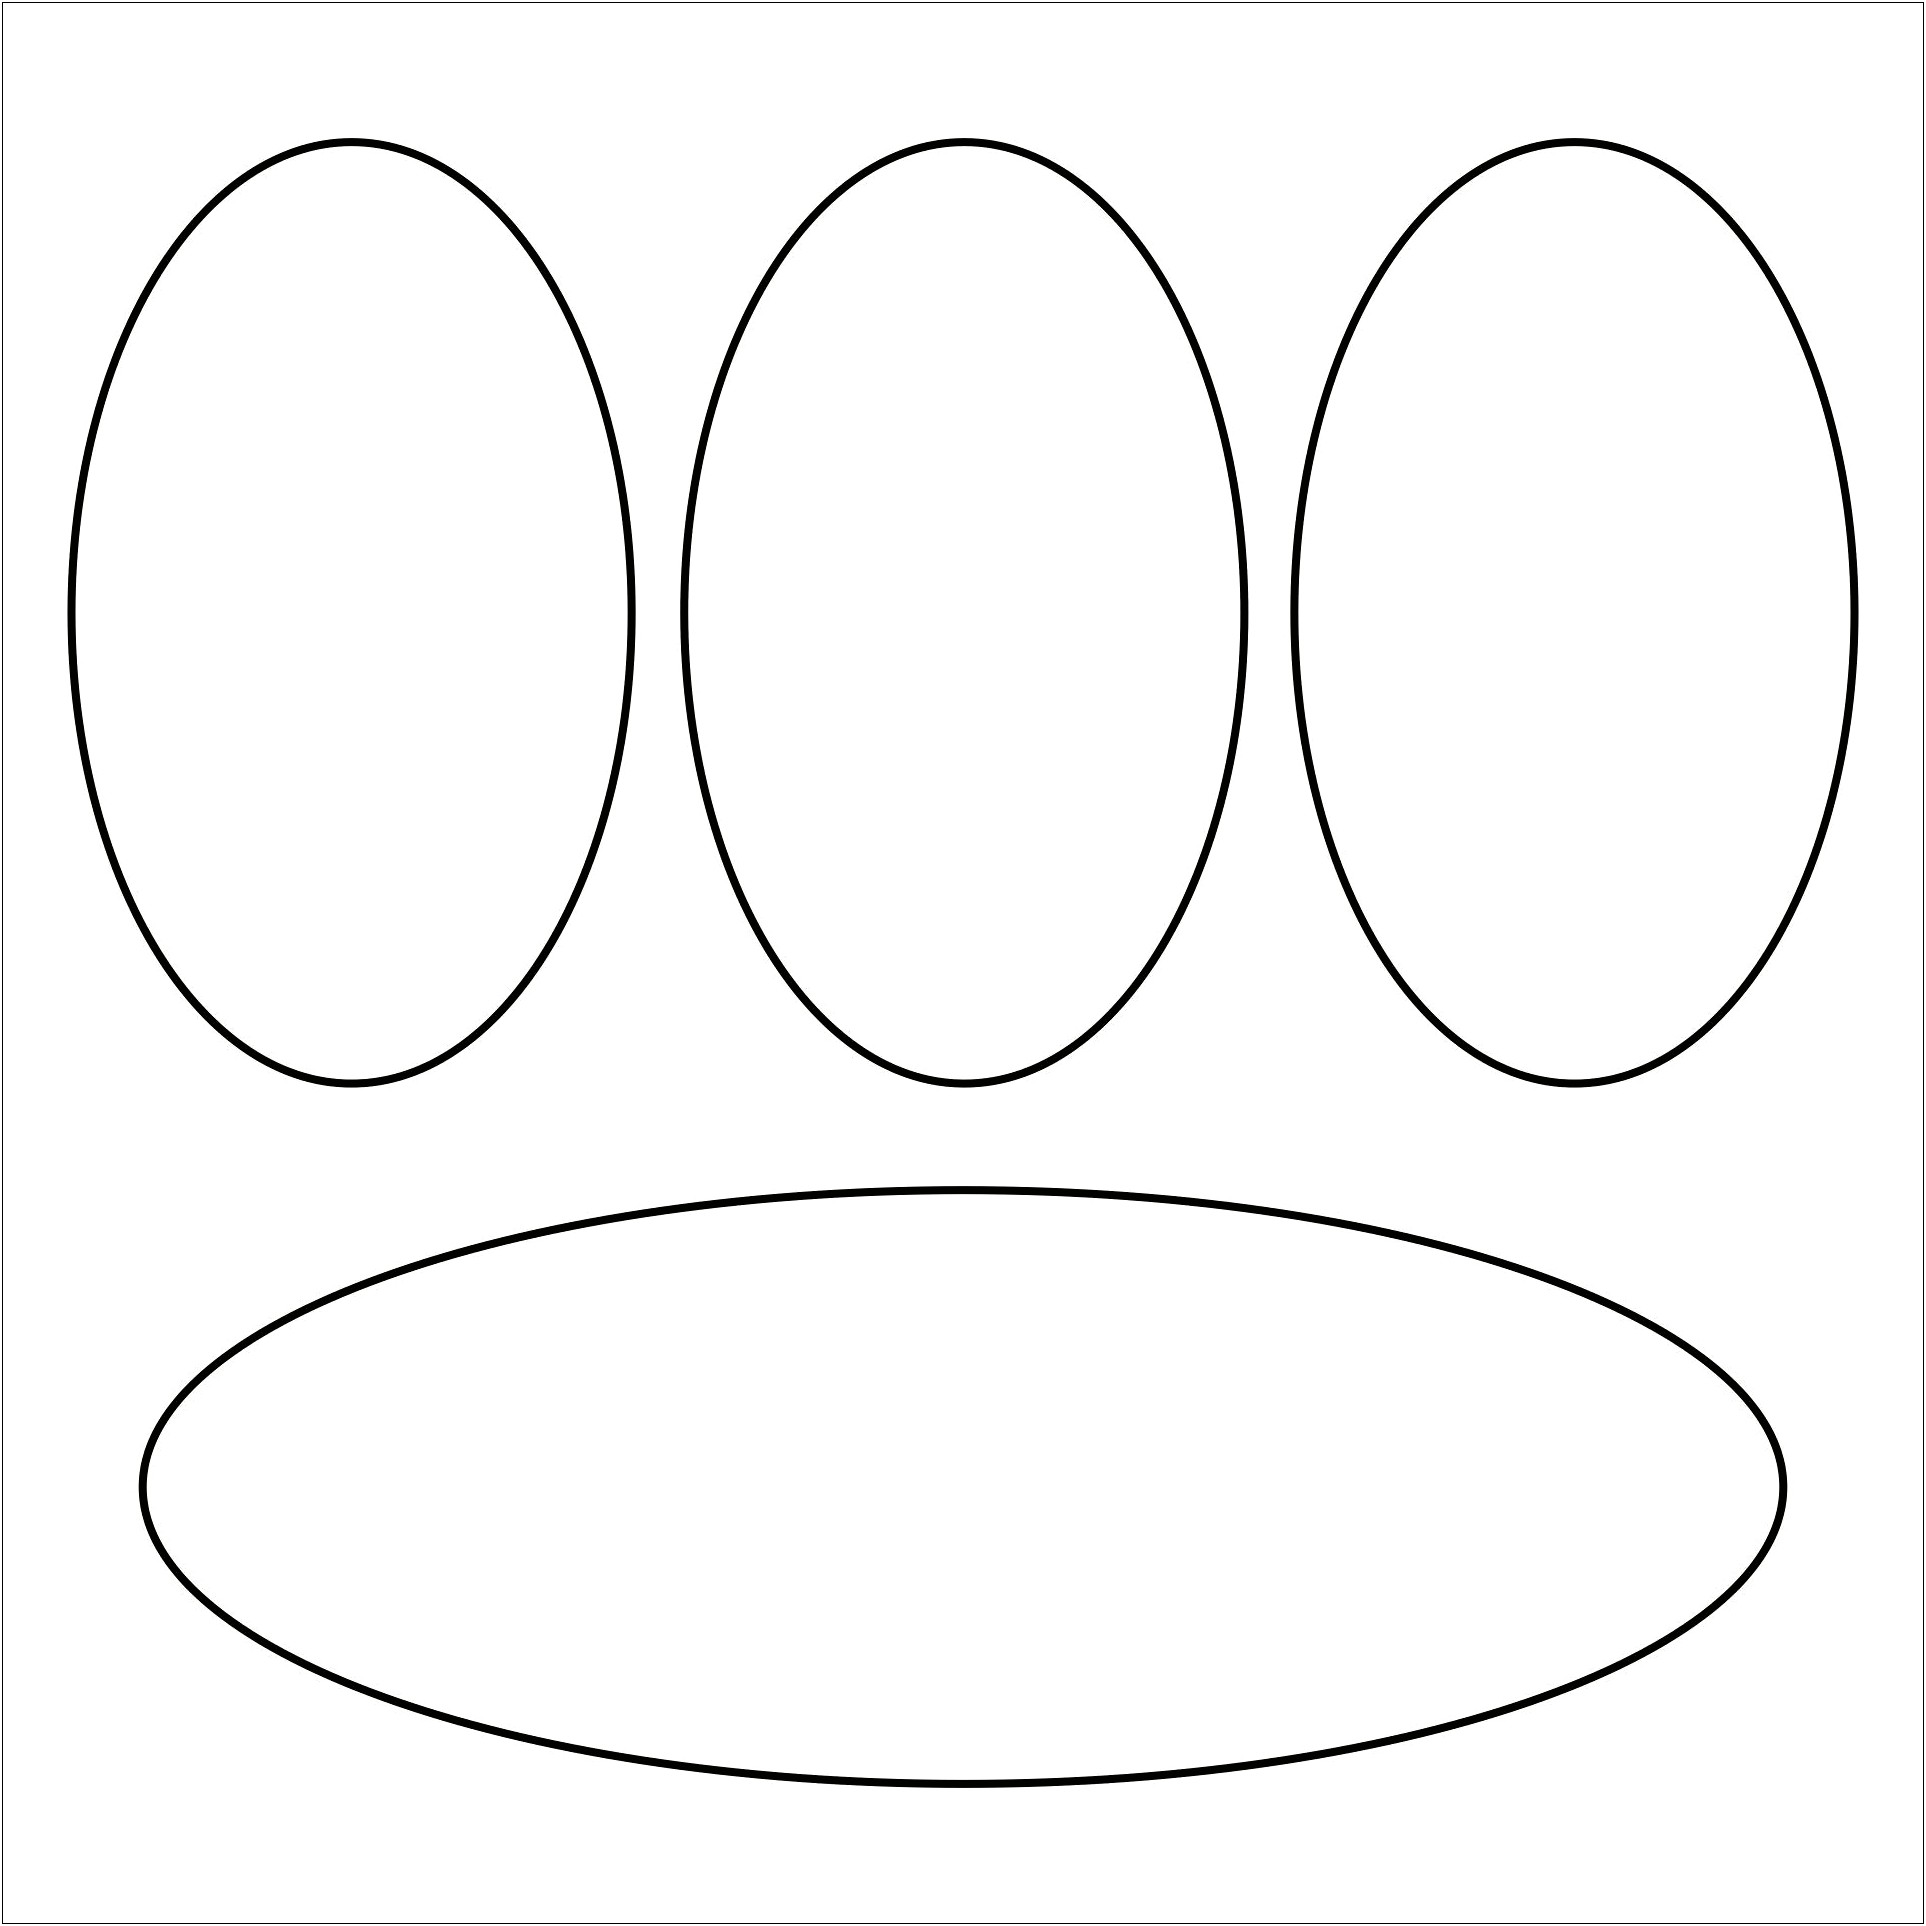 24 X 18mm Oval Free Template